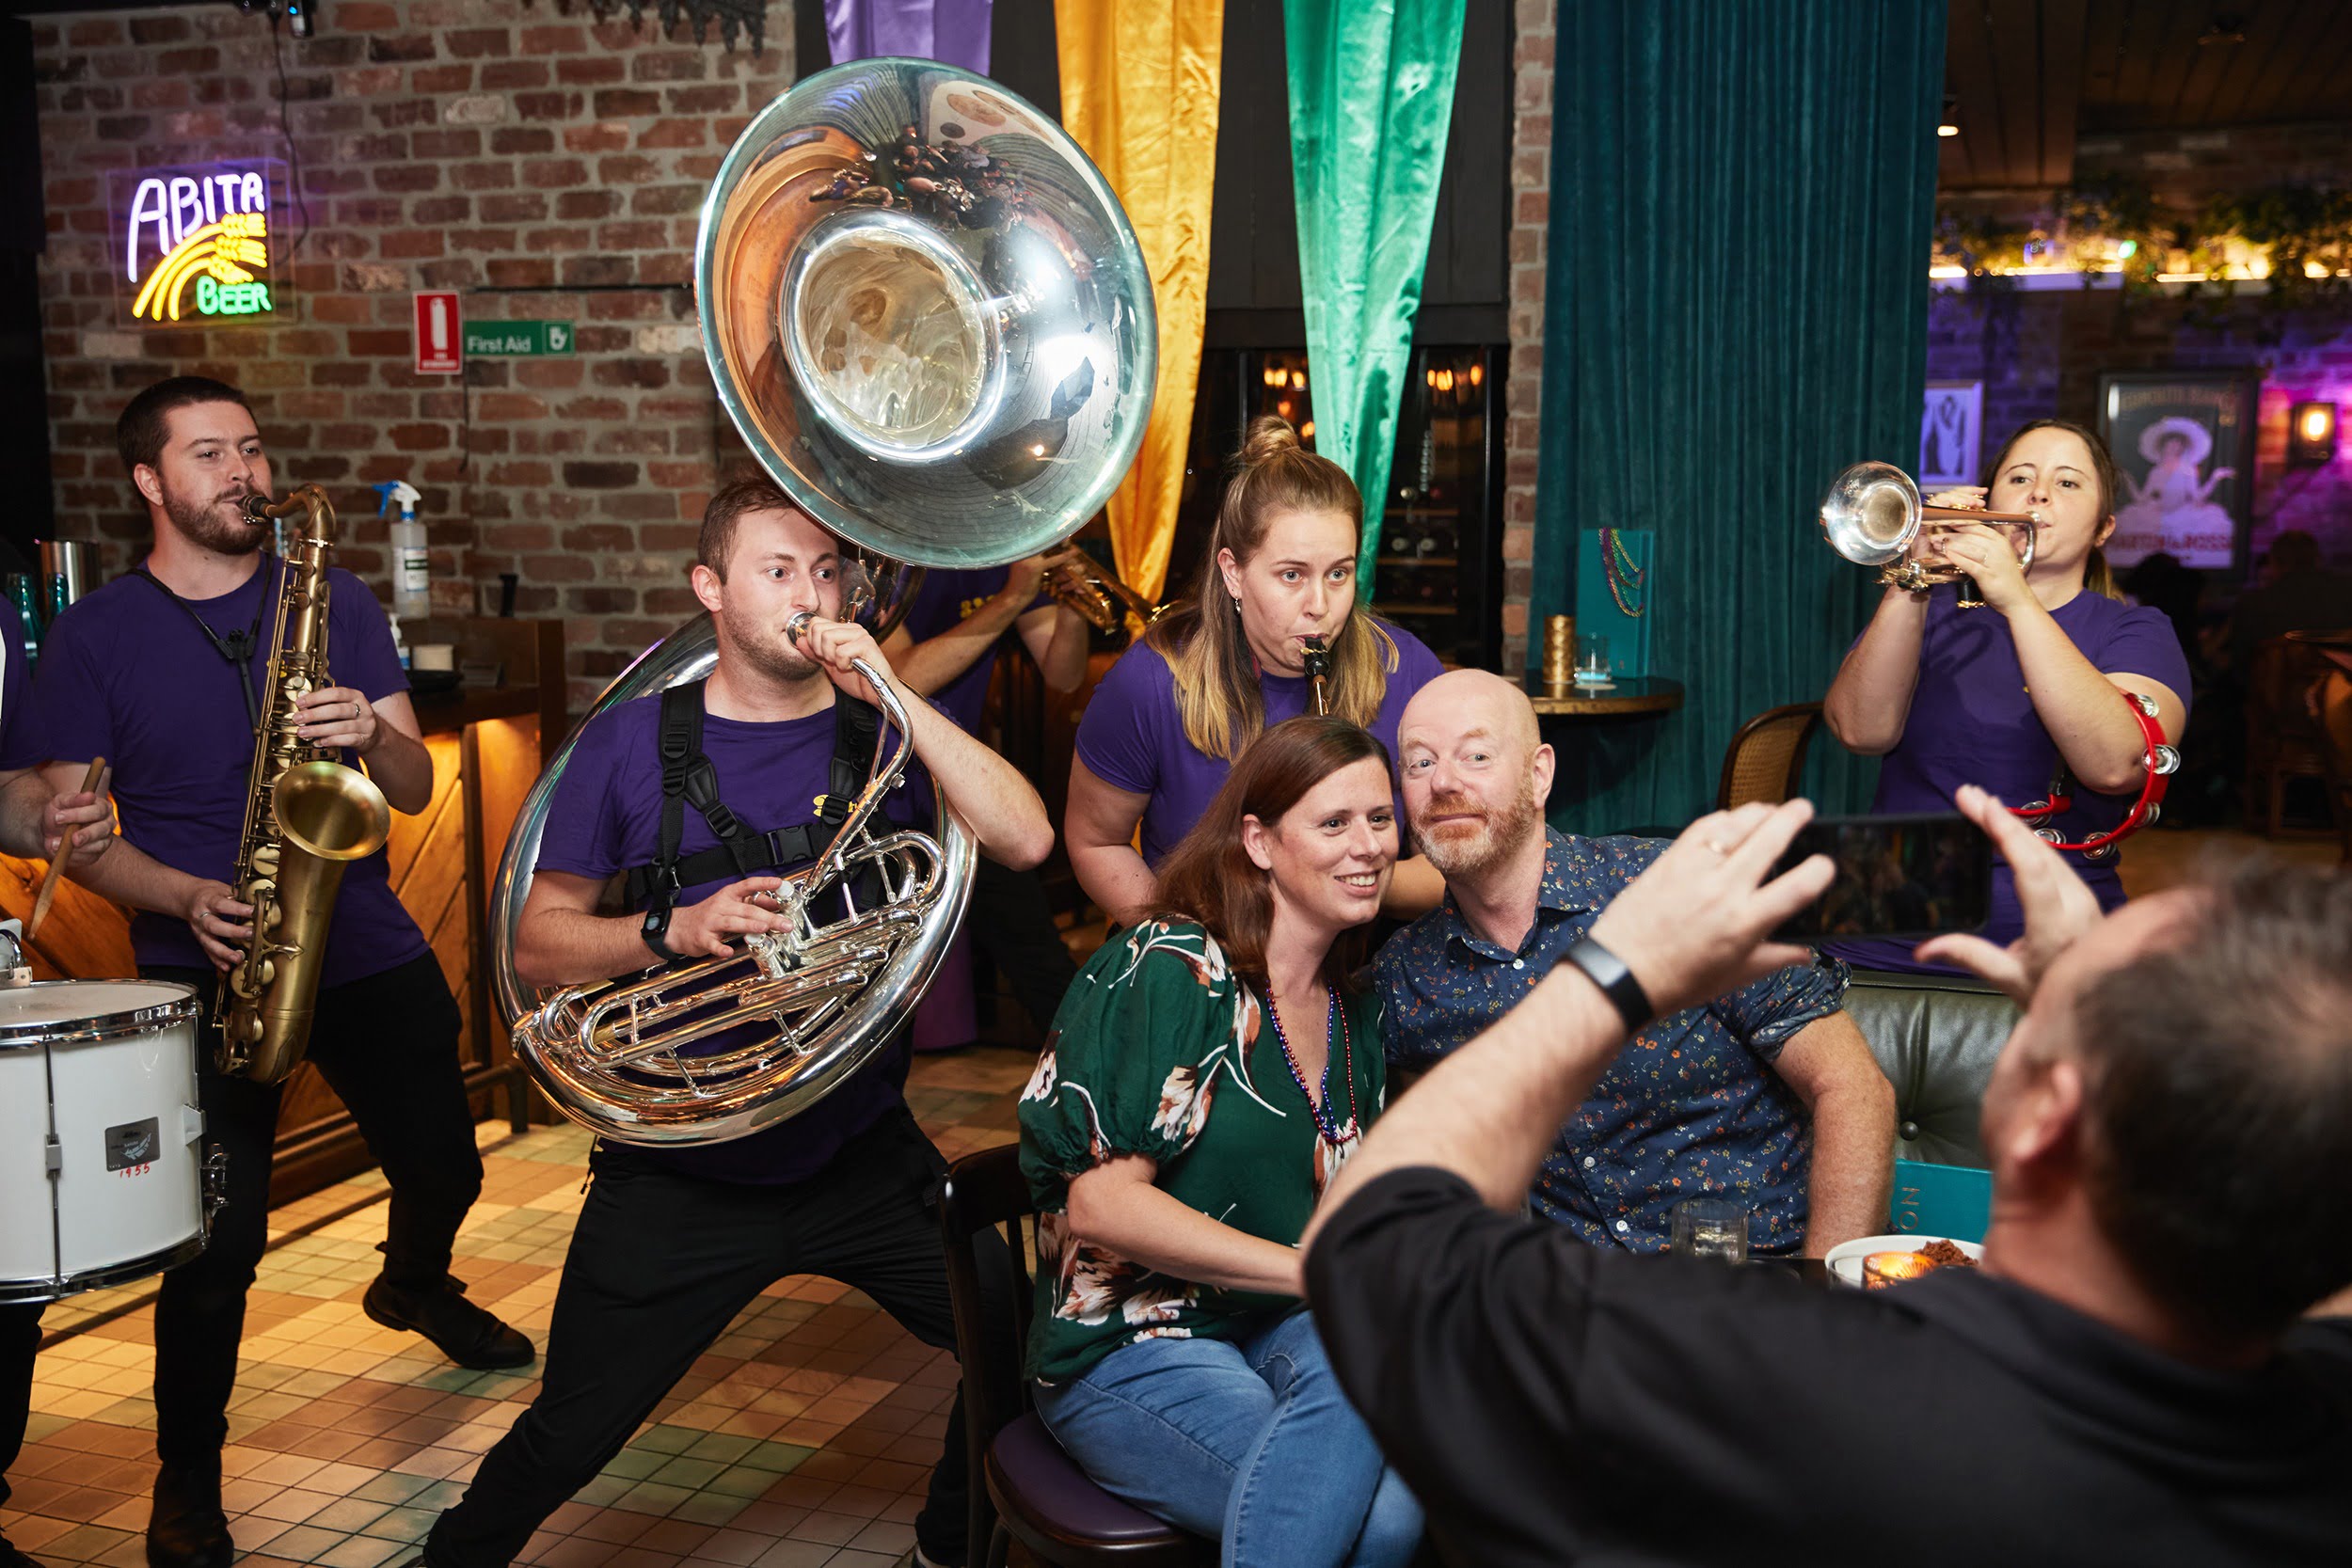 Live Brass Band at NOLA for New Orleans Mardi Gras in Sydney